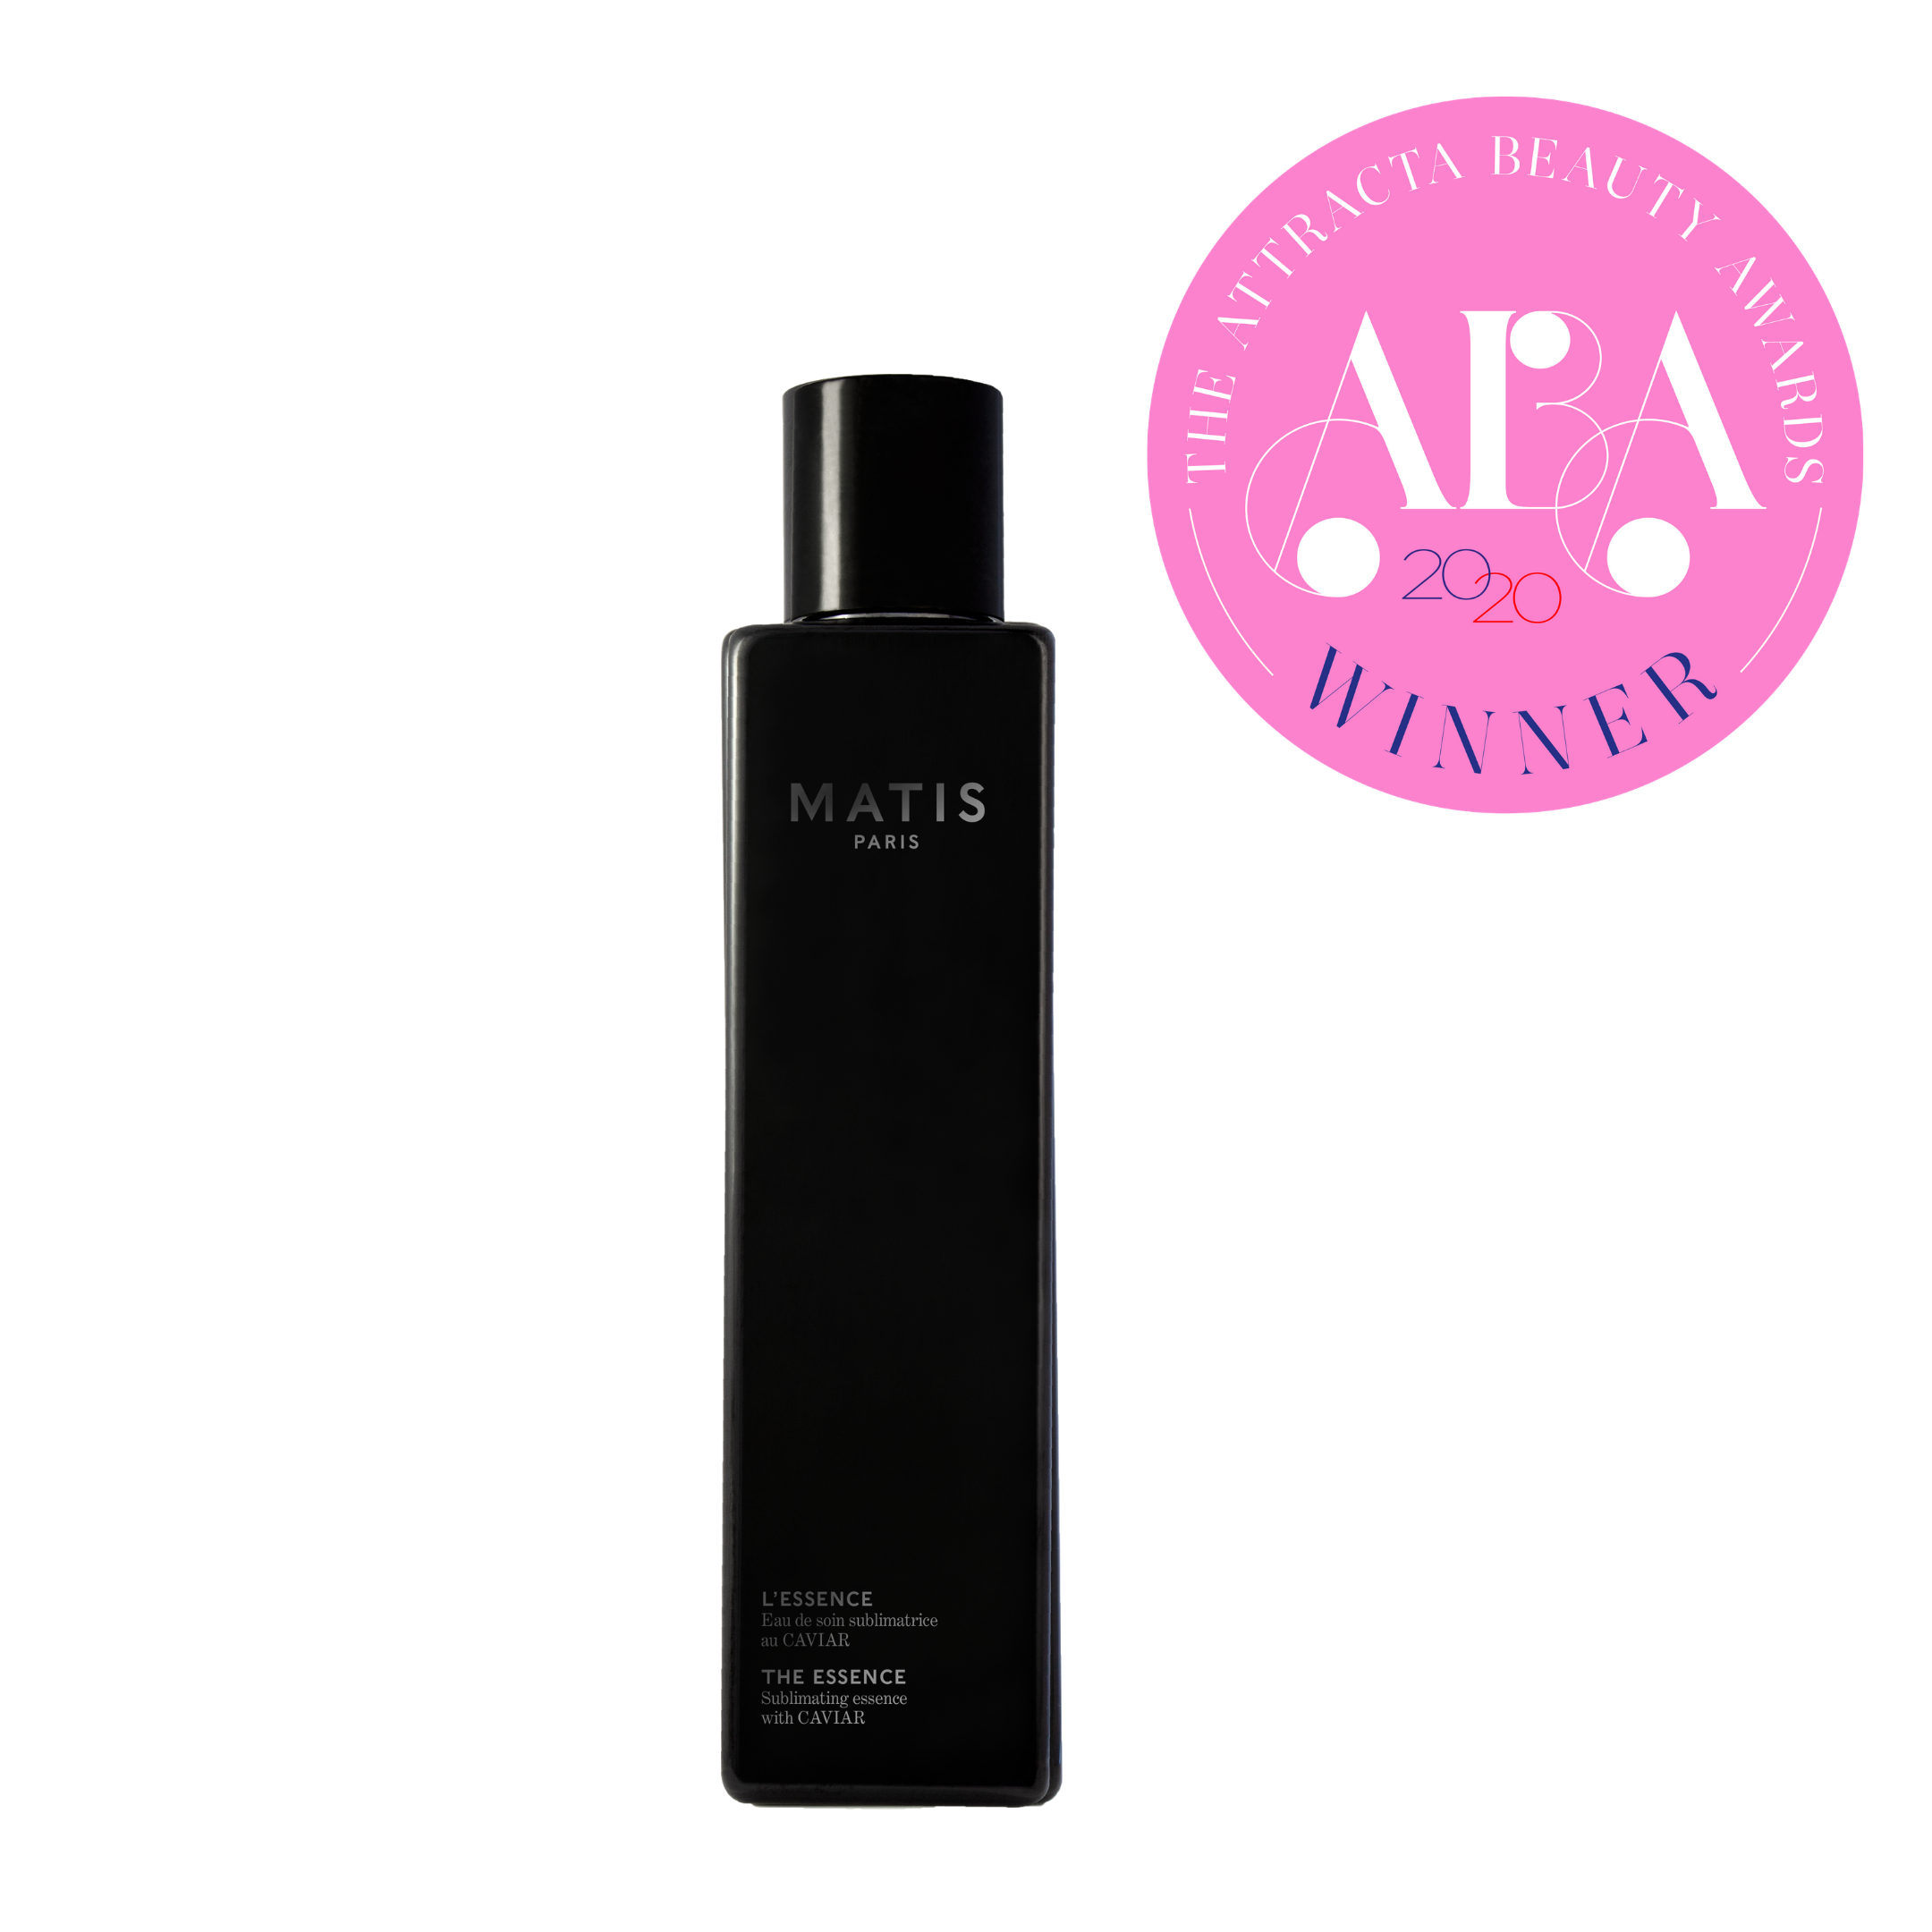 MATIS Caviar The Essence wins the Award of Best Mist/Toner at the Attracta Beauty Awards 2020